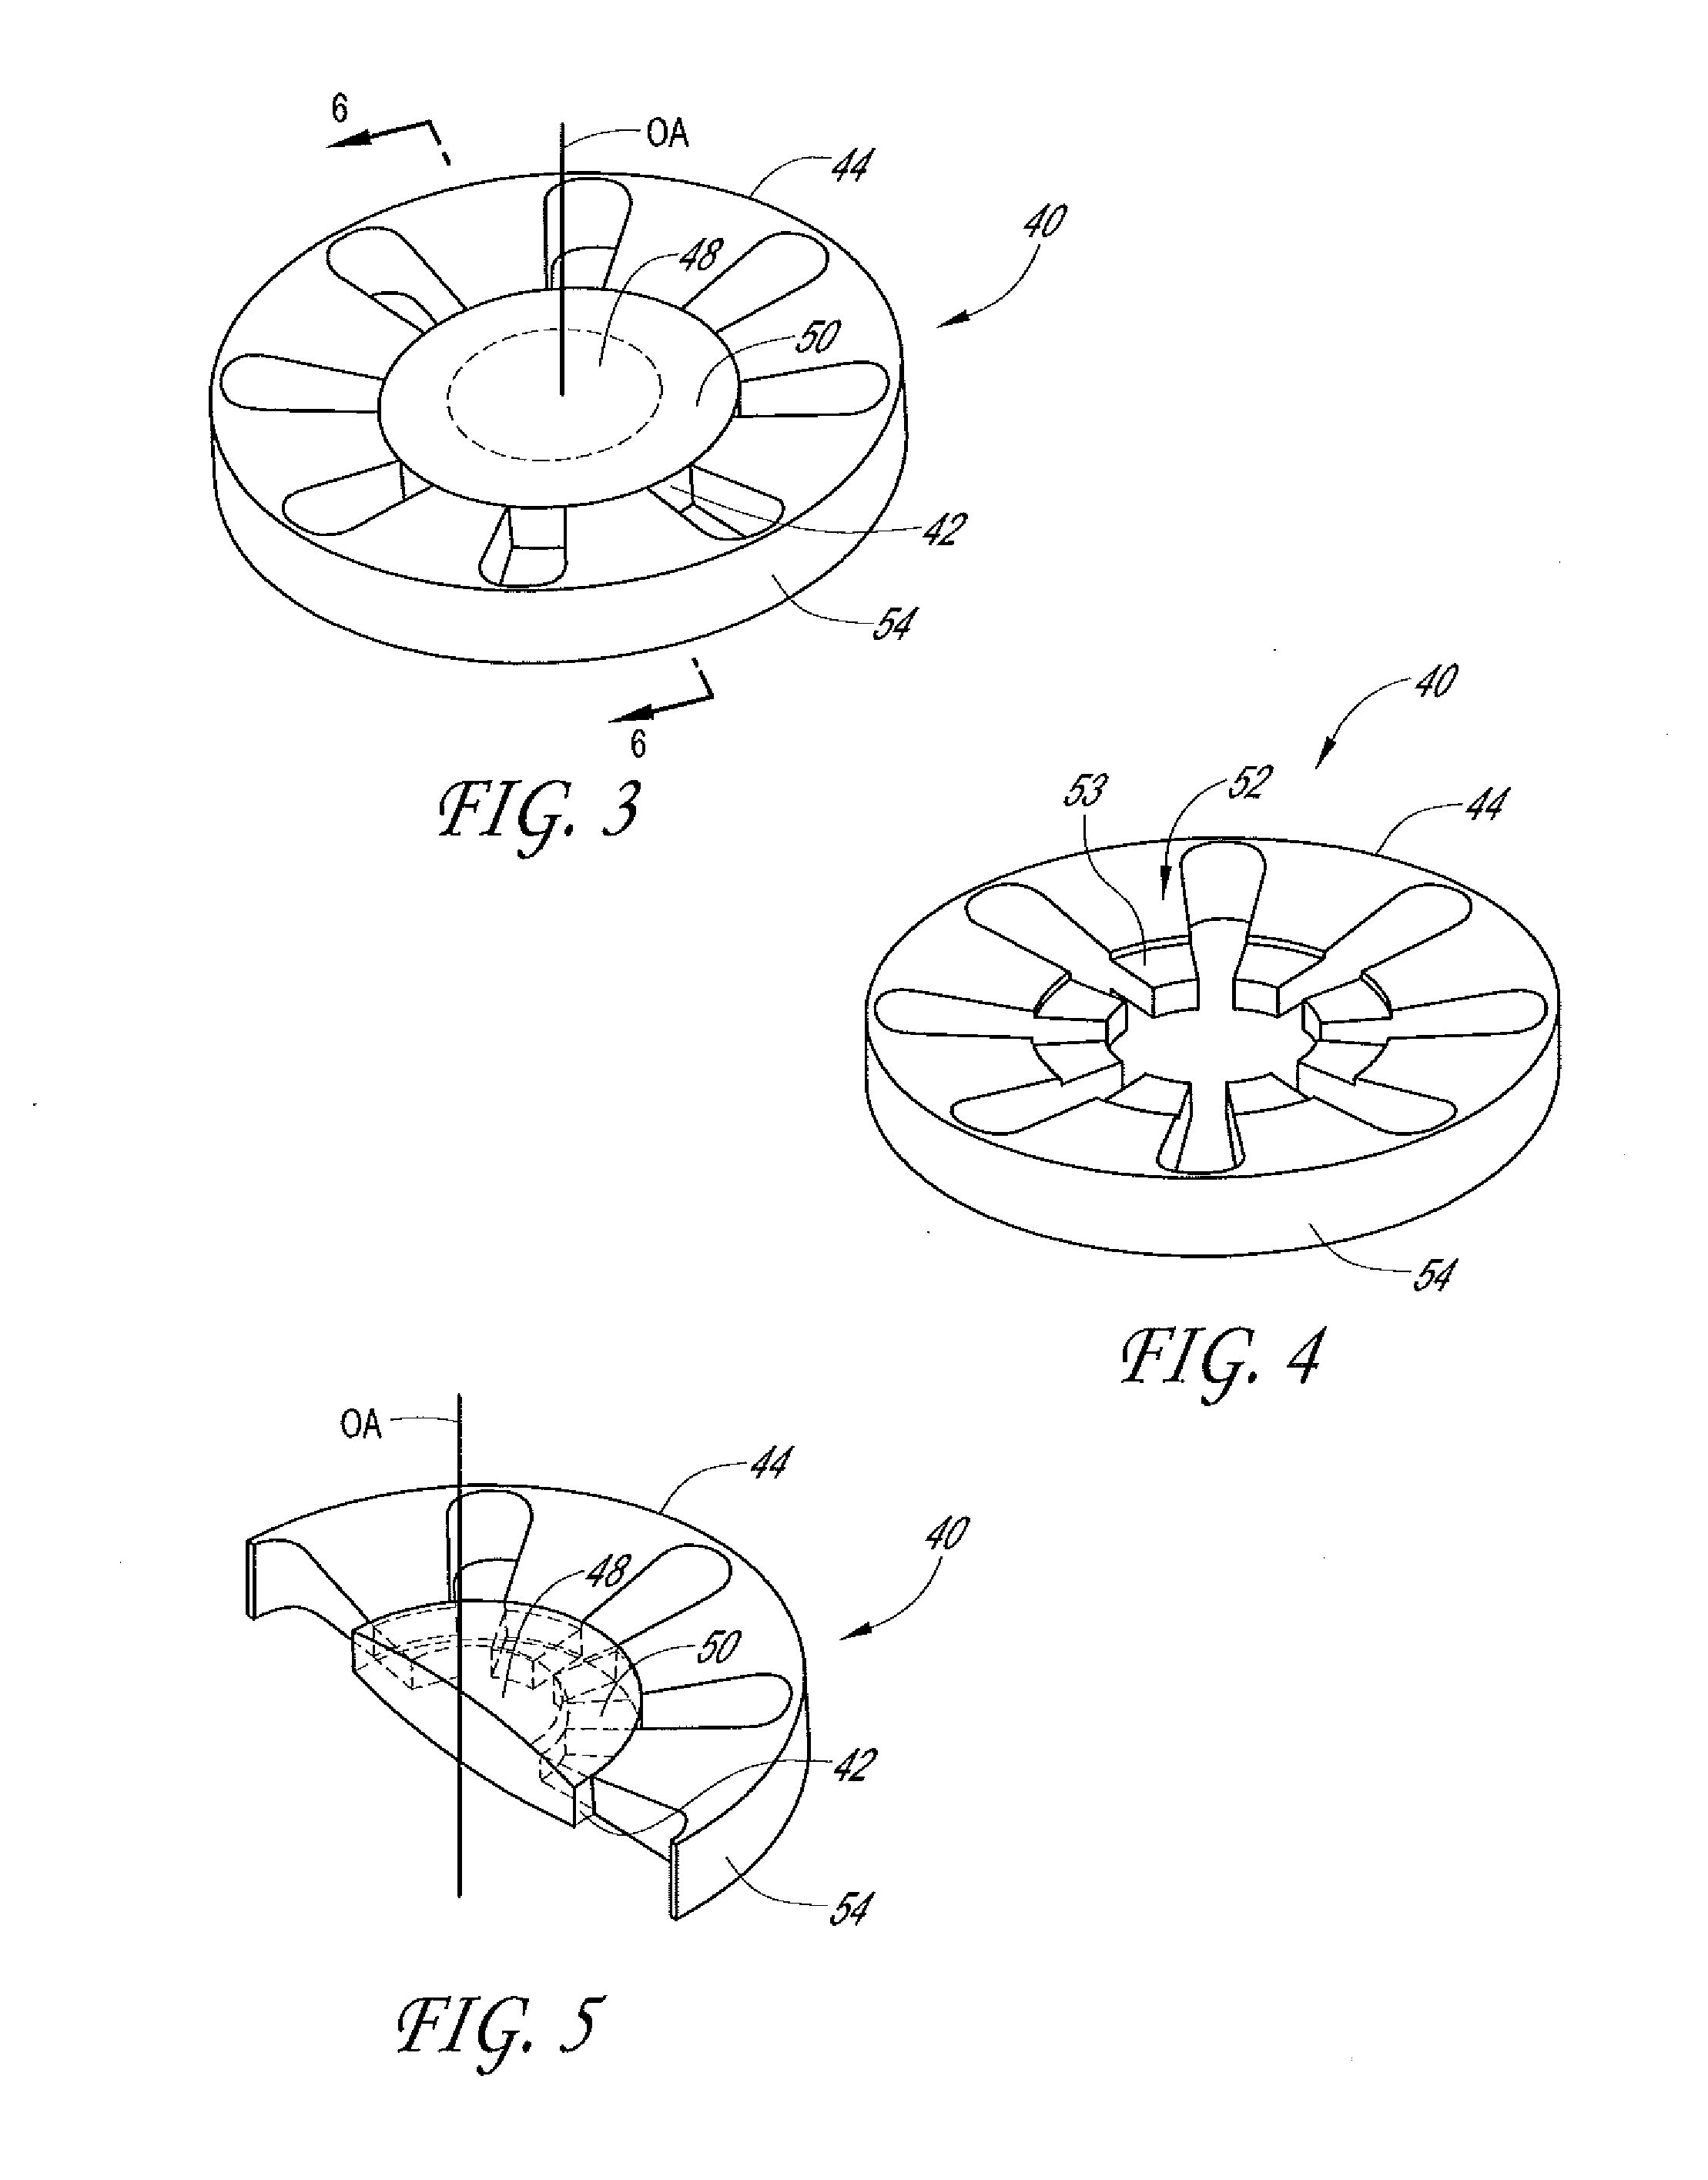 Intraocular lens with shape changing capability to provide enhanced accomodation and visual acuity